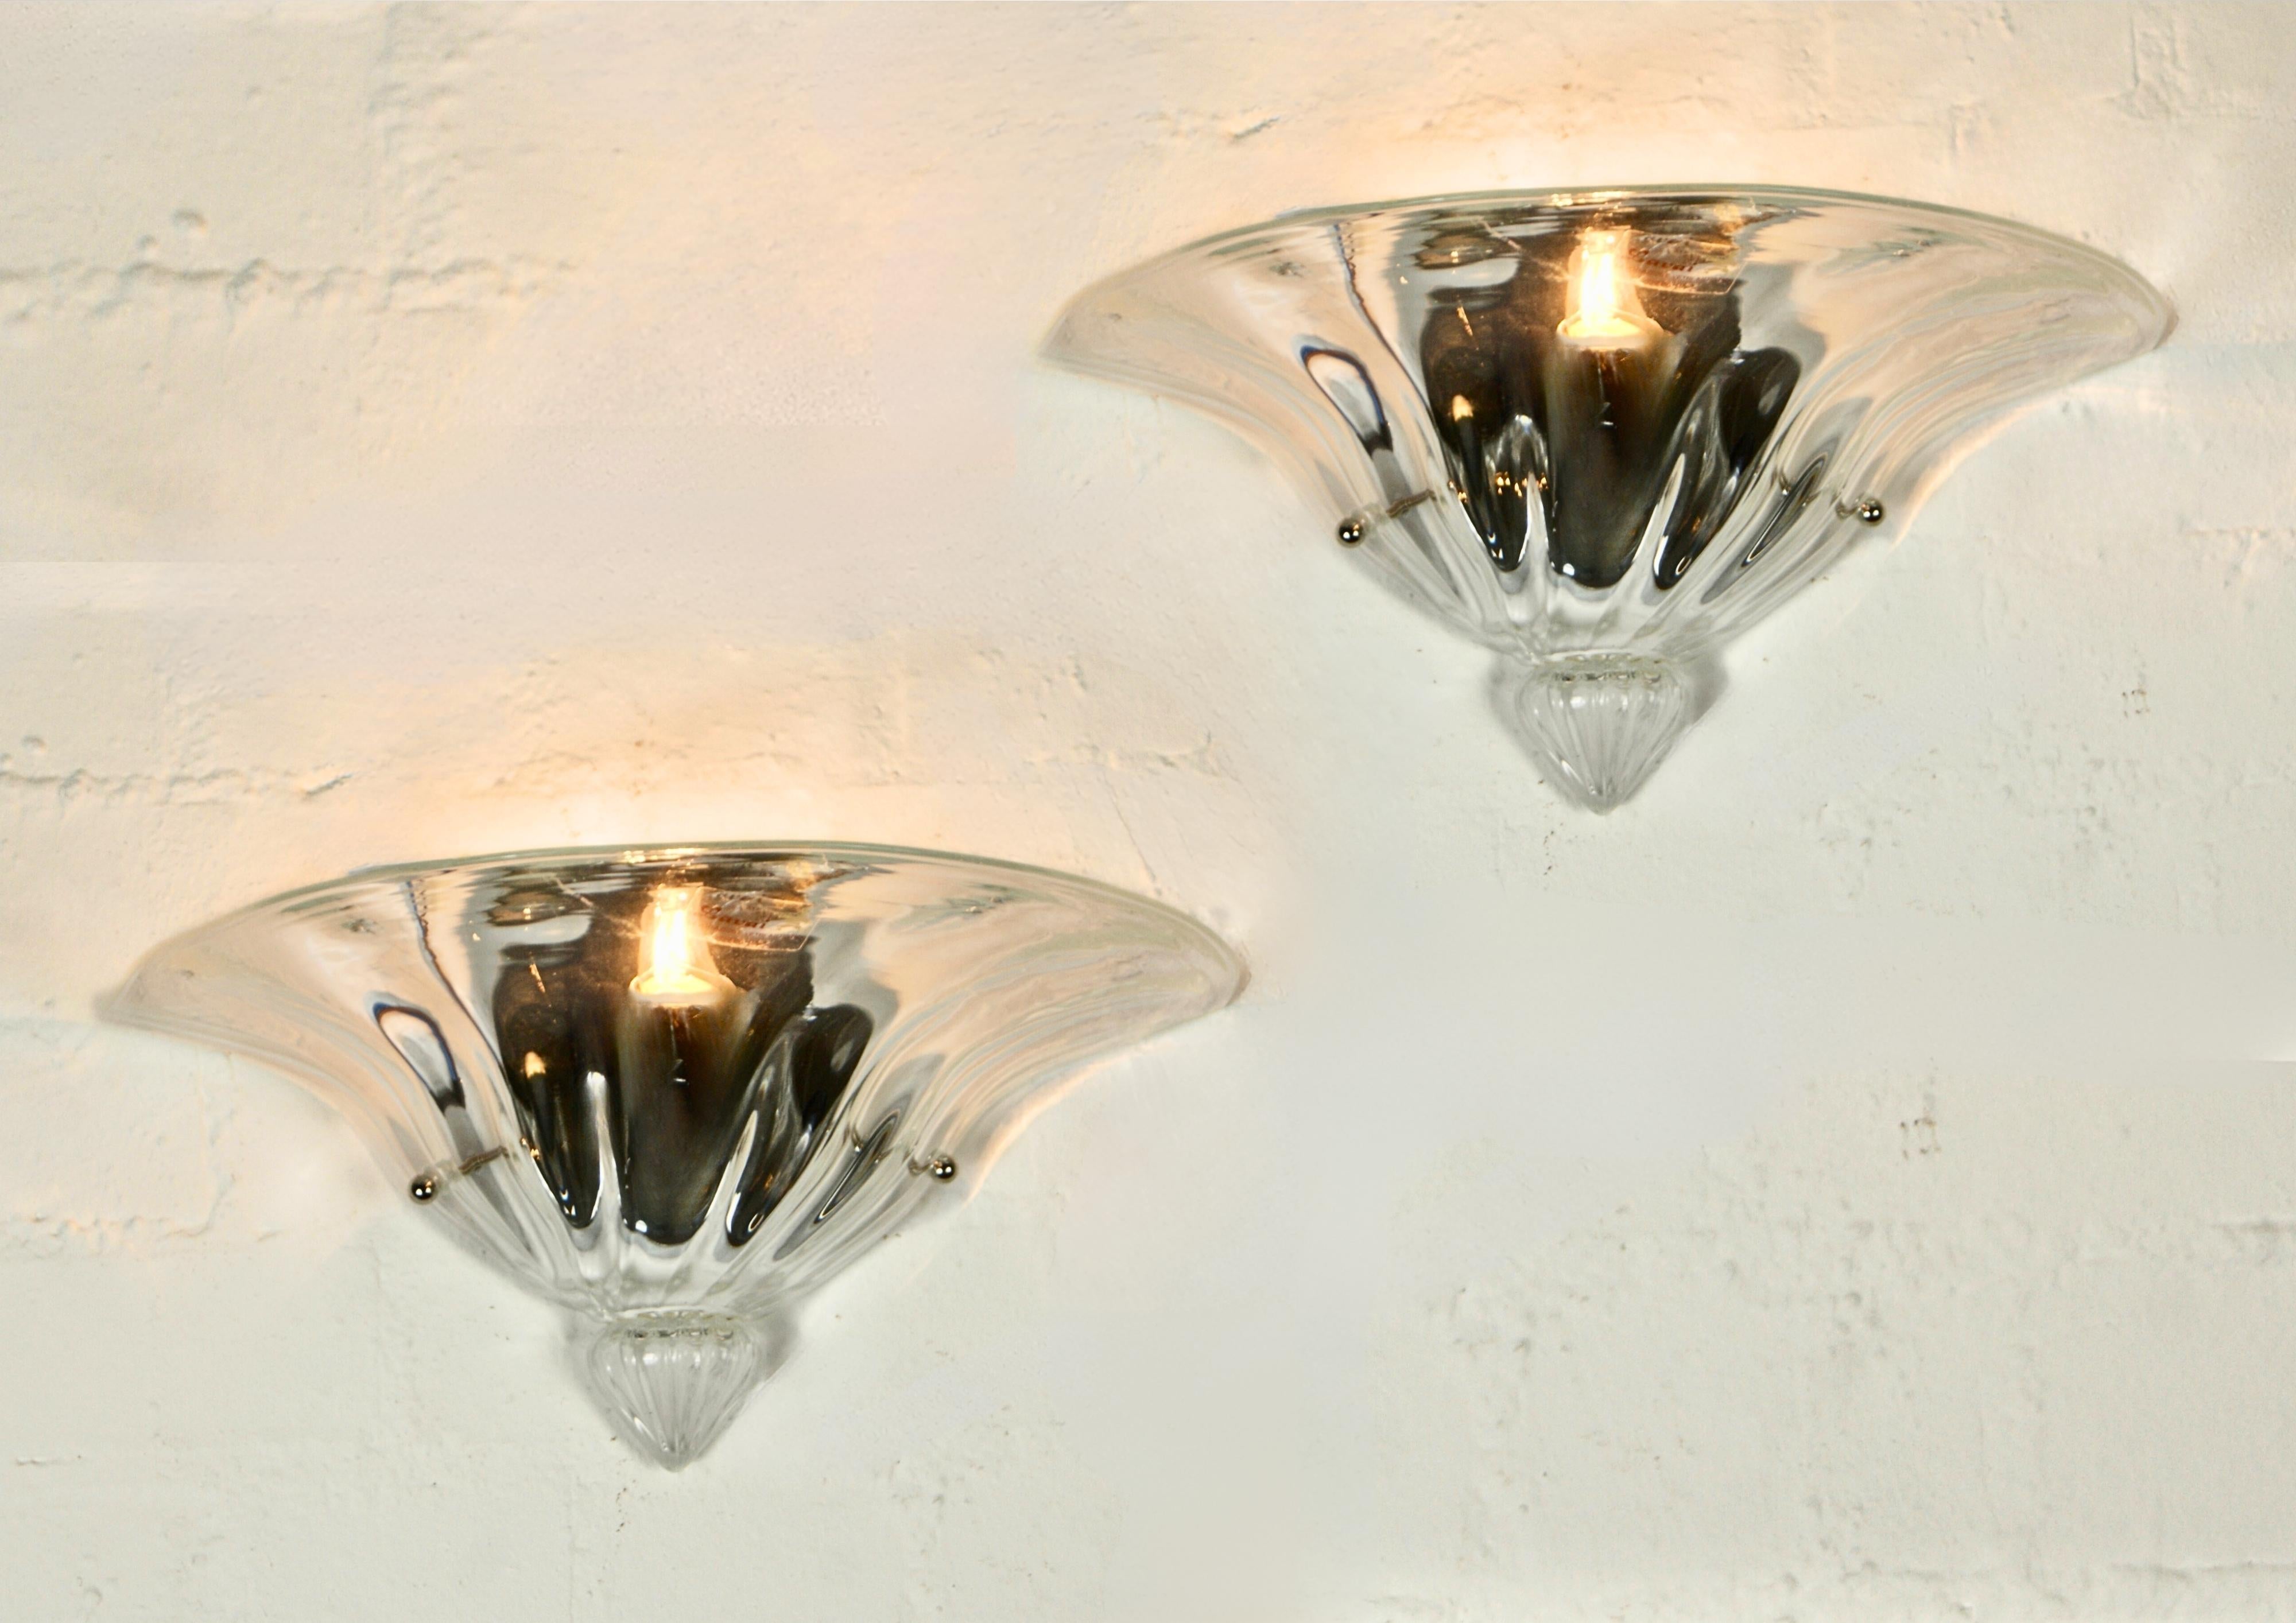 Pair of labeled clear glass crystal Murano glass wall sconces, circa 1990s.
Labeled 'LAVAI Lavarazione Vetri Artistici Venezia.
Beautiful mezza luna clam shaped clear crystal wall lamps.
Large sized at approximately 37cm wide.
 
The glass diffusers